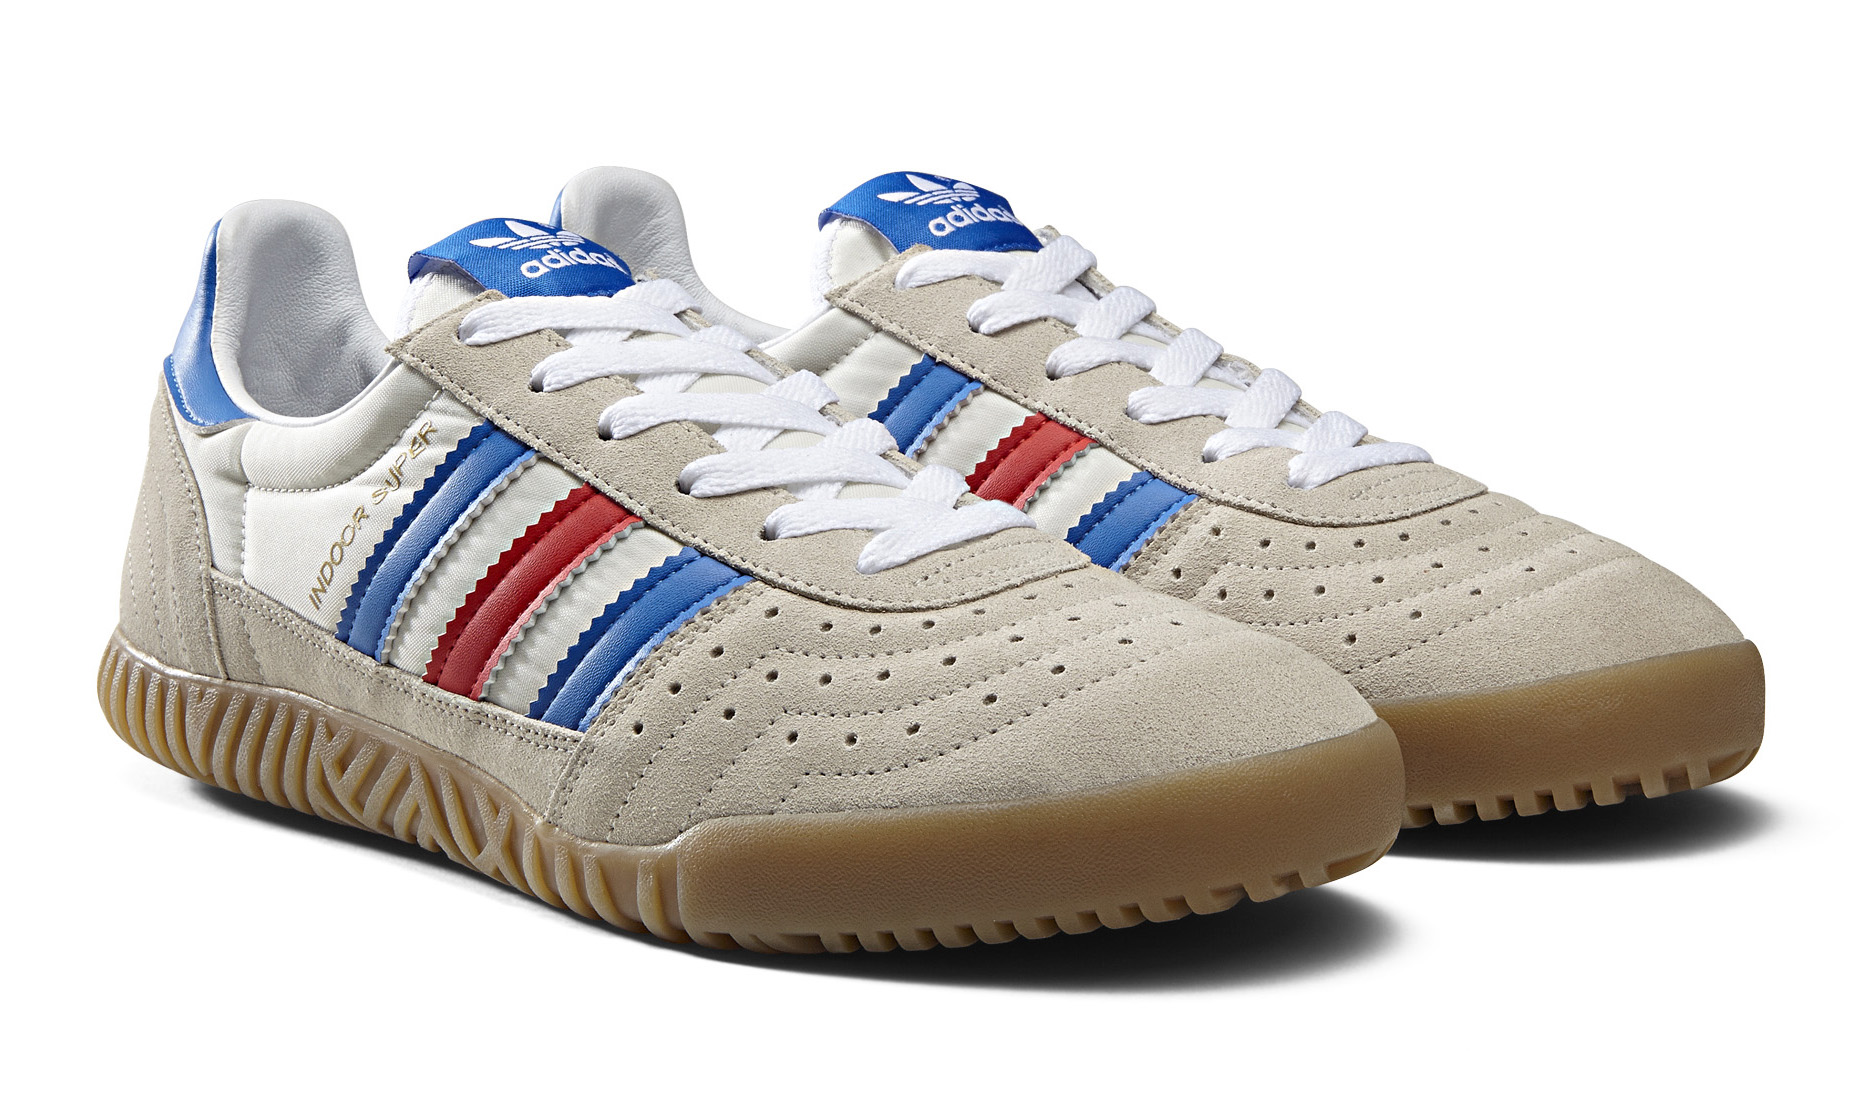 Adidas Spezial Fall Winter 2016 | Sole Collector